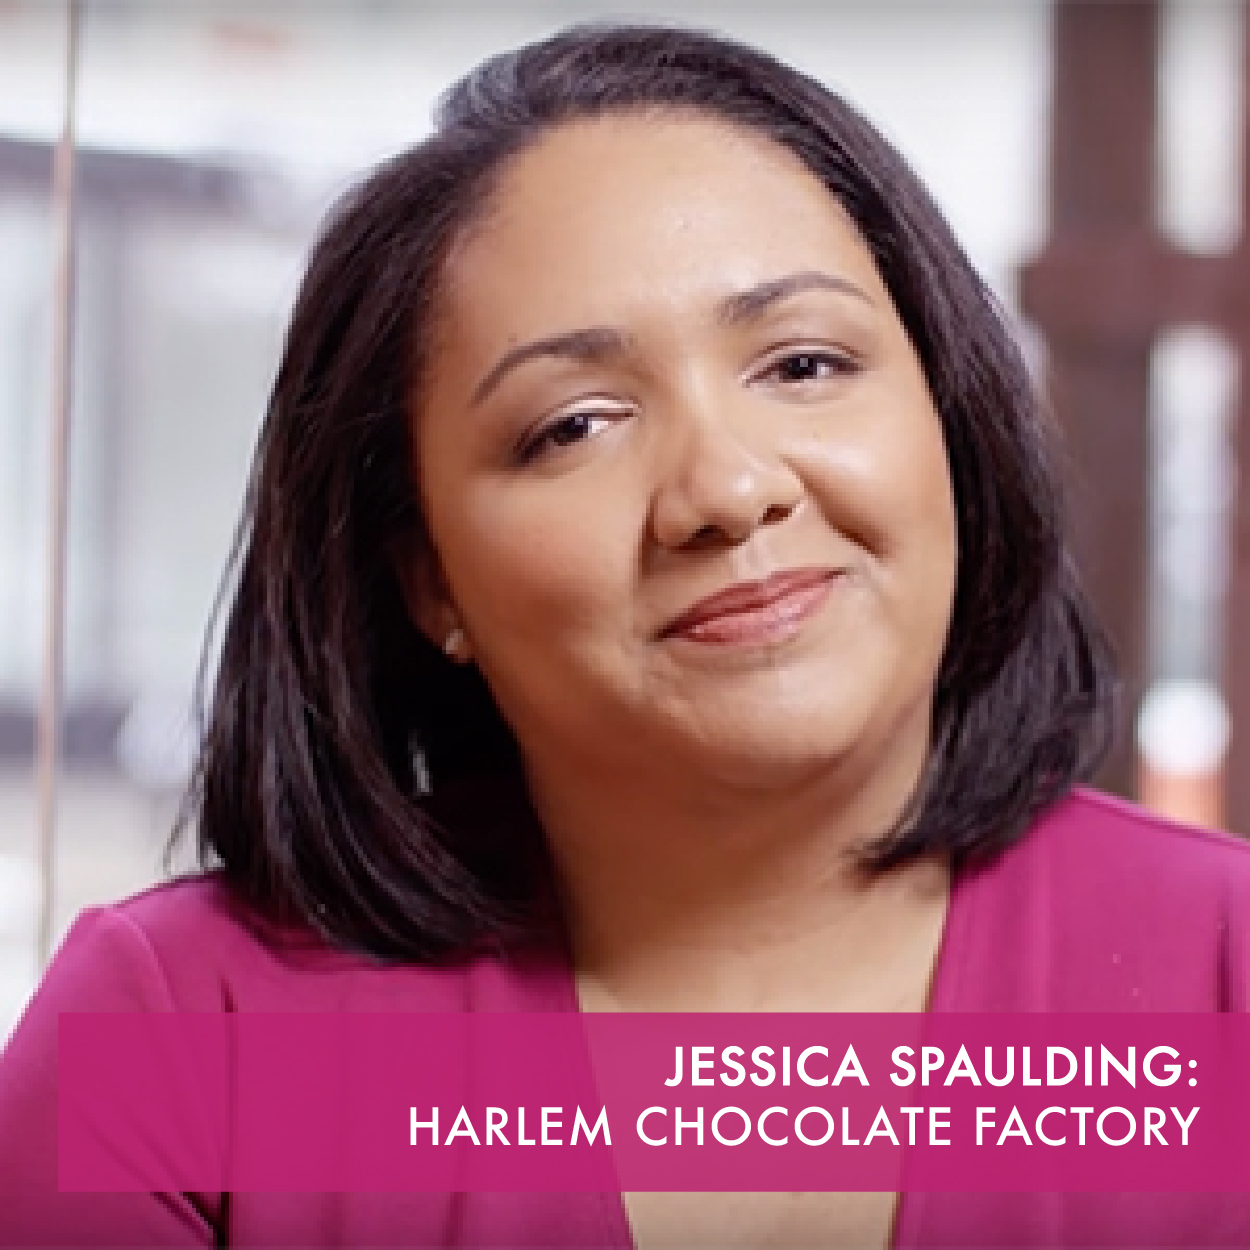 The Harlem Chocolate Factory shares the rich and diverse history of Harlem using chocolate. All products are handcrafted on-site using fresh, local ingredients.